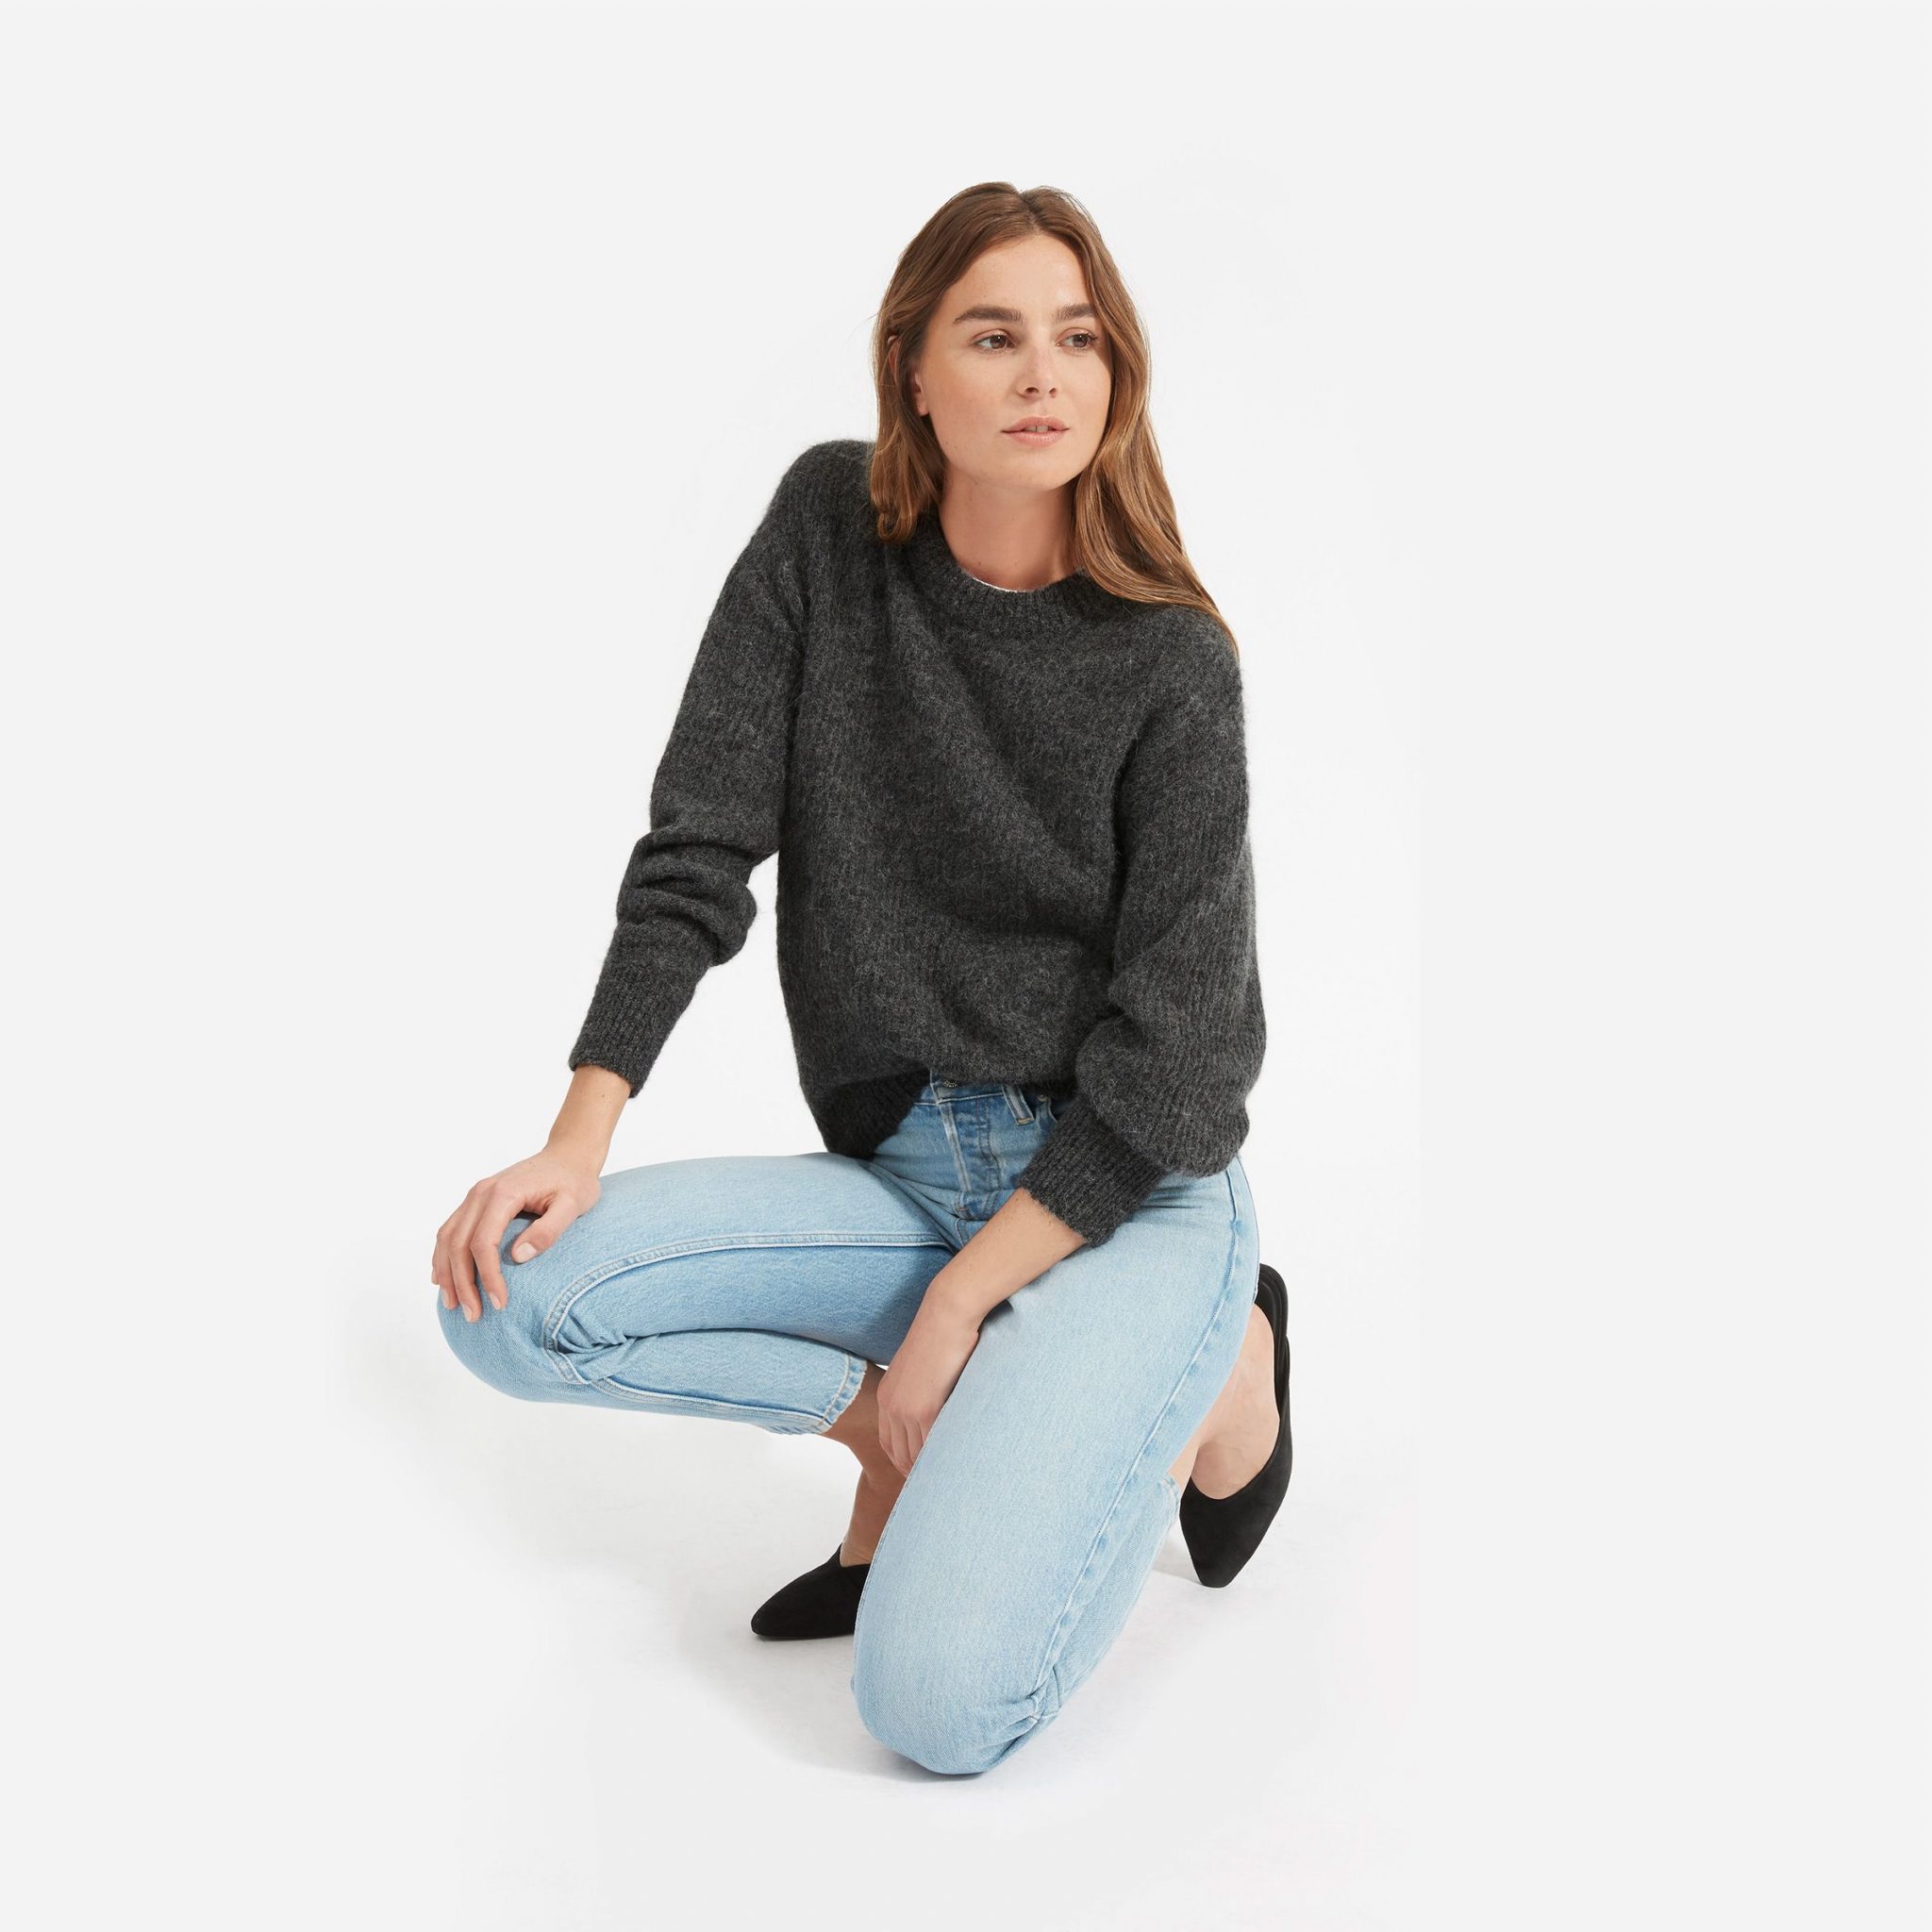 Everlane Just Released Its Comfiest Sweater Yet